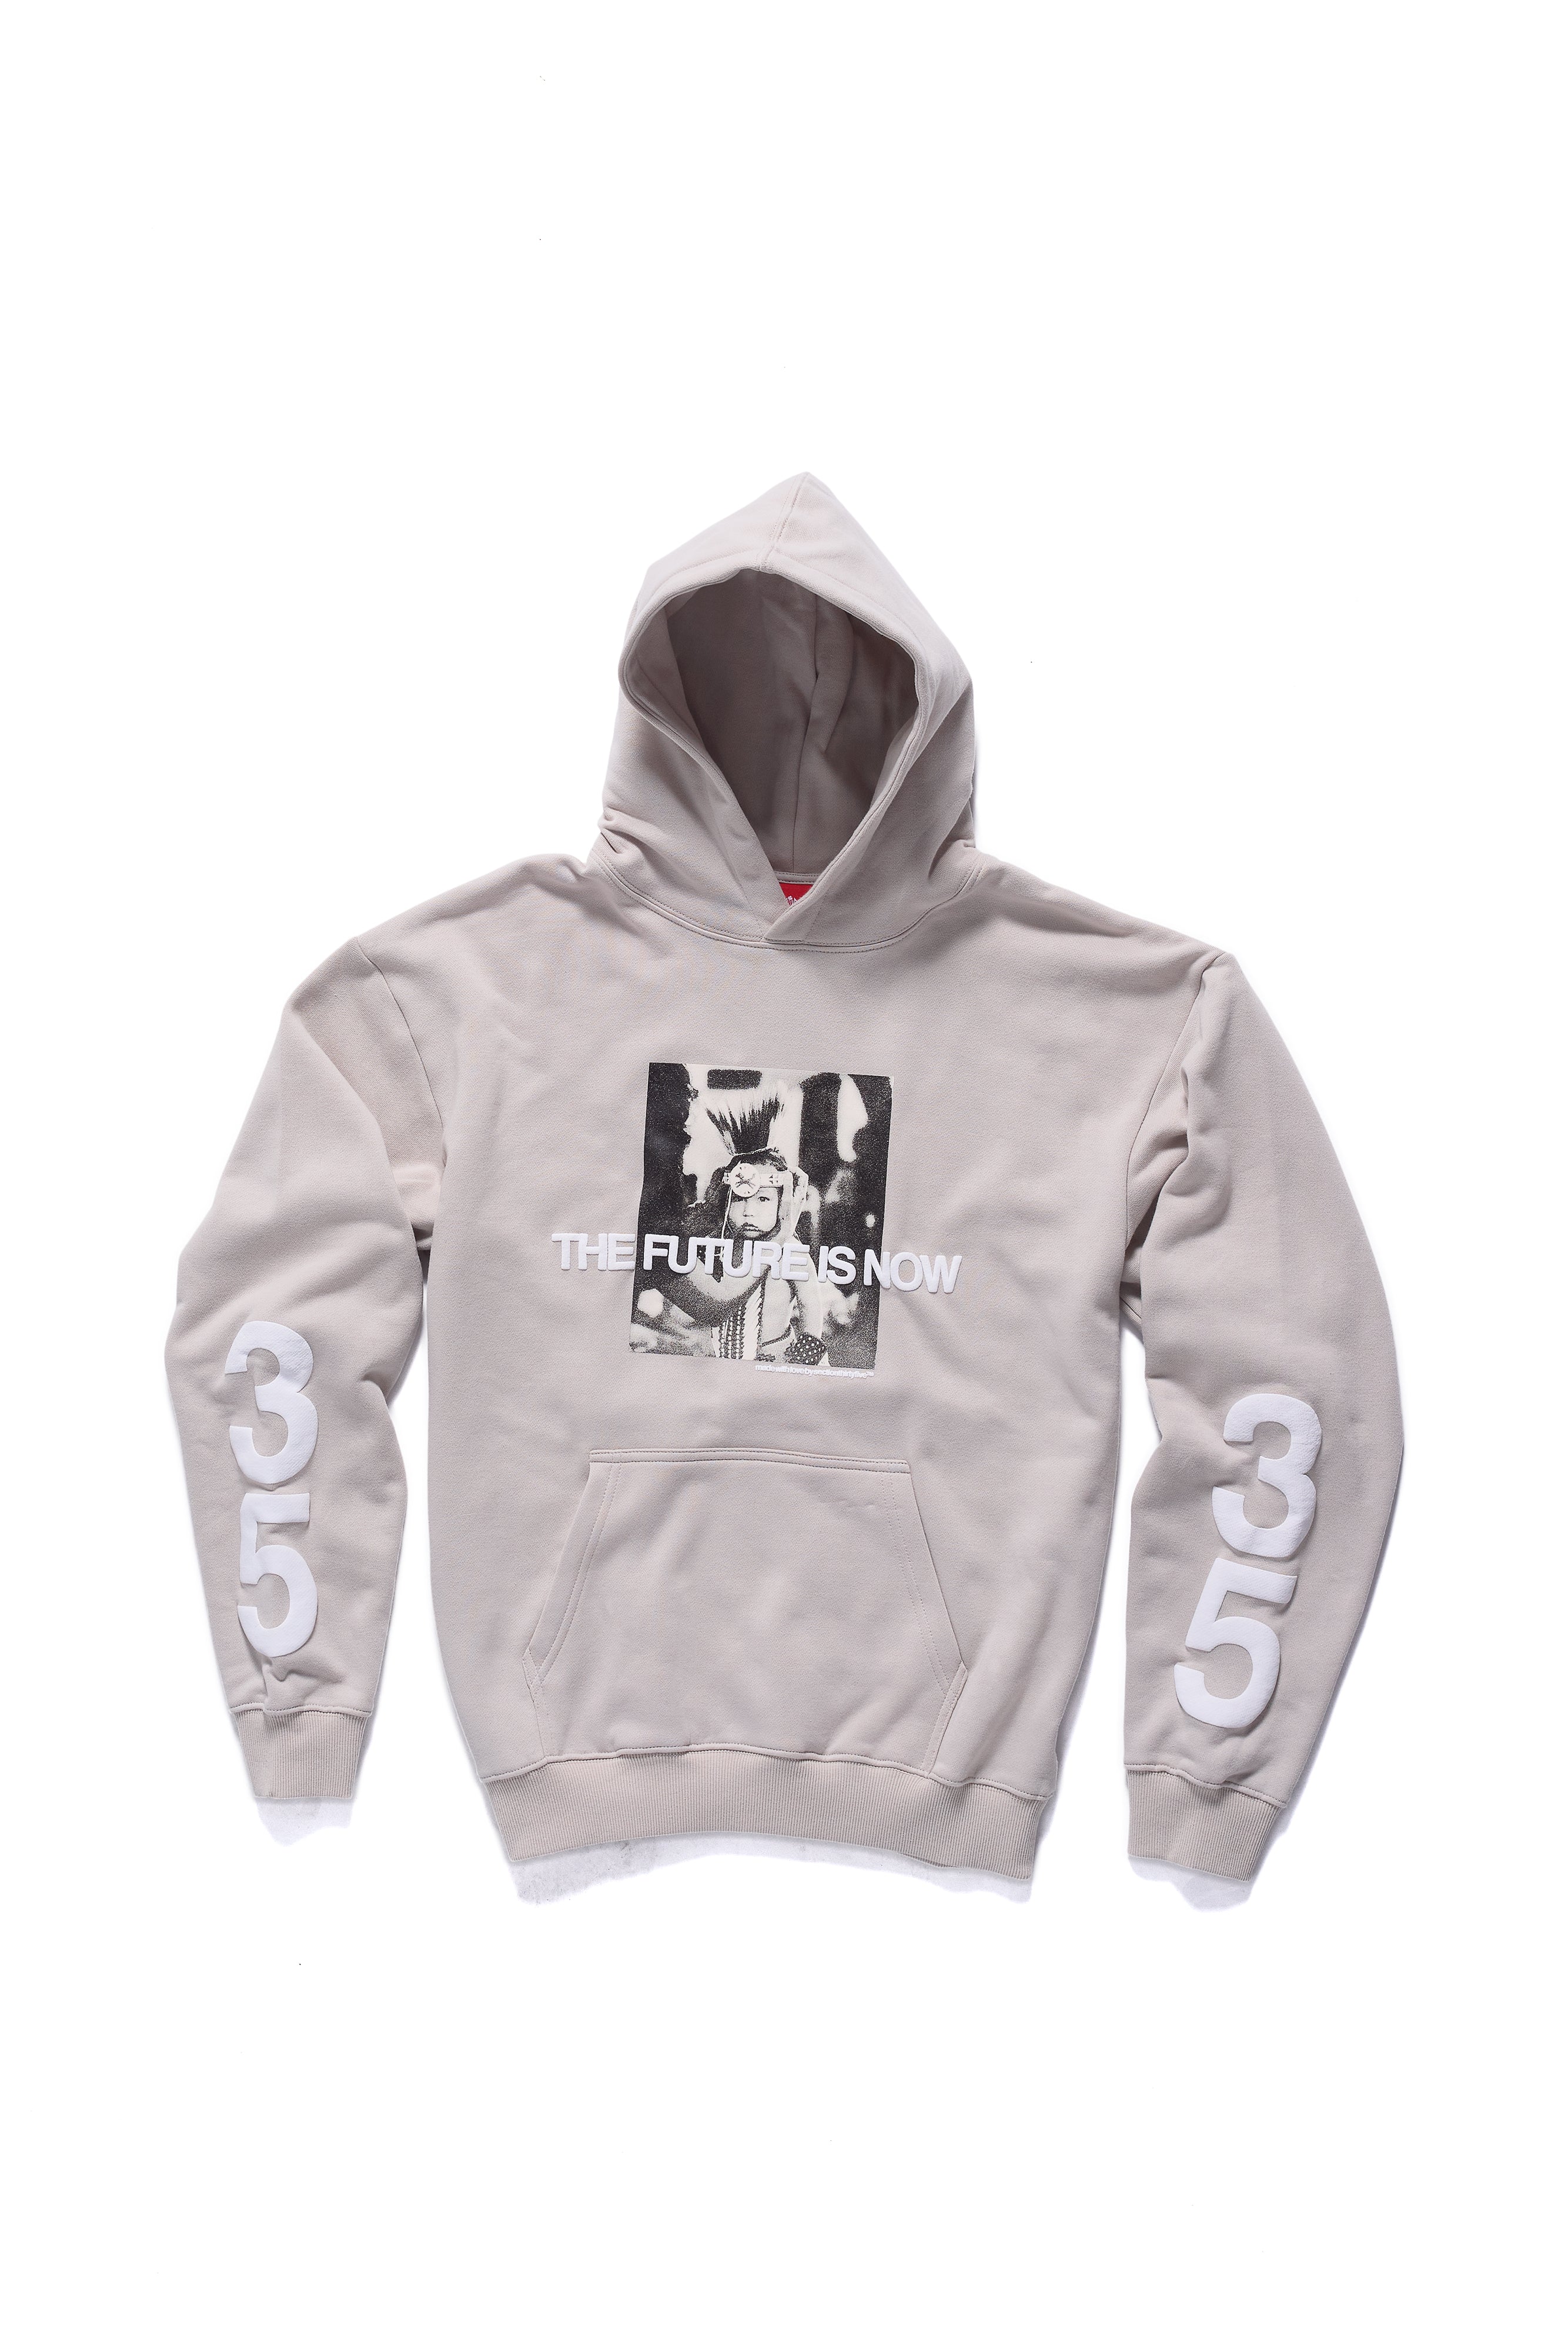 The Future Is Now Hoodie - Grey